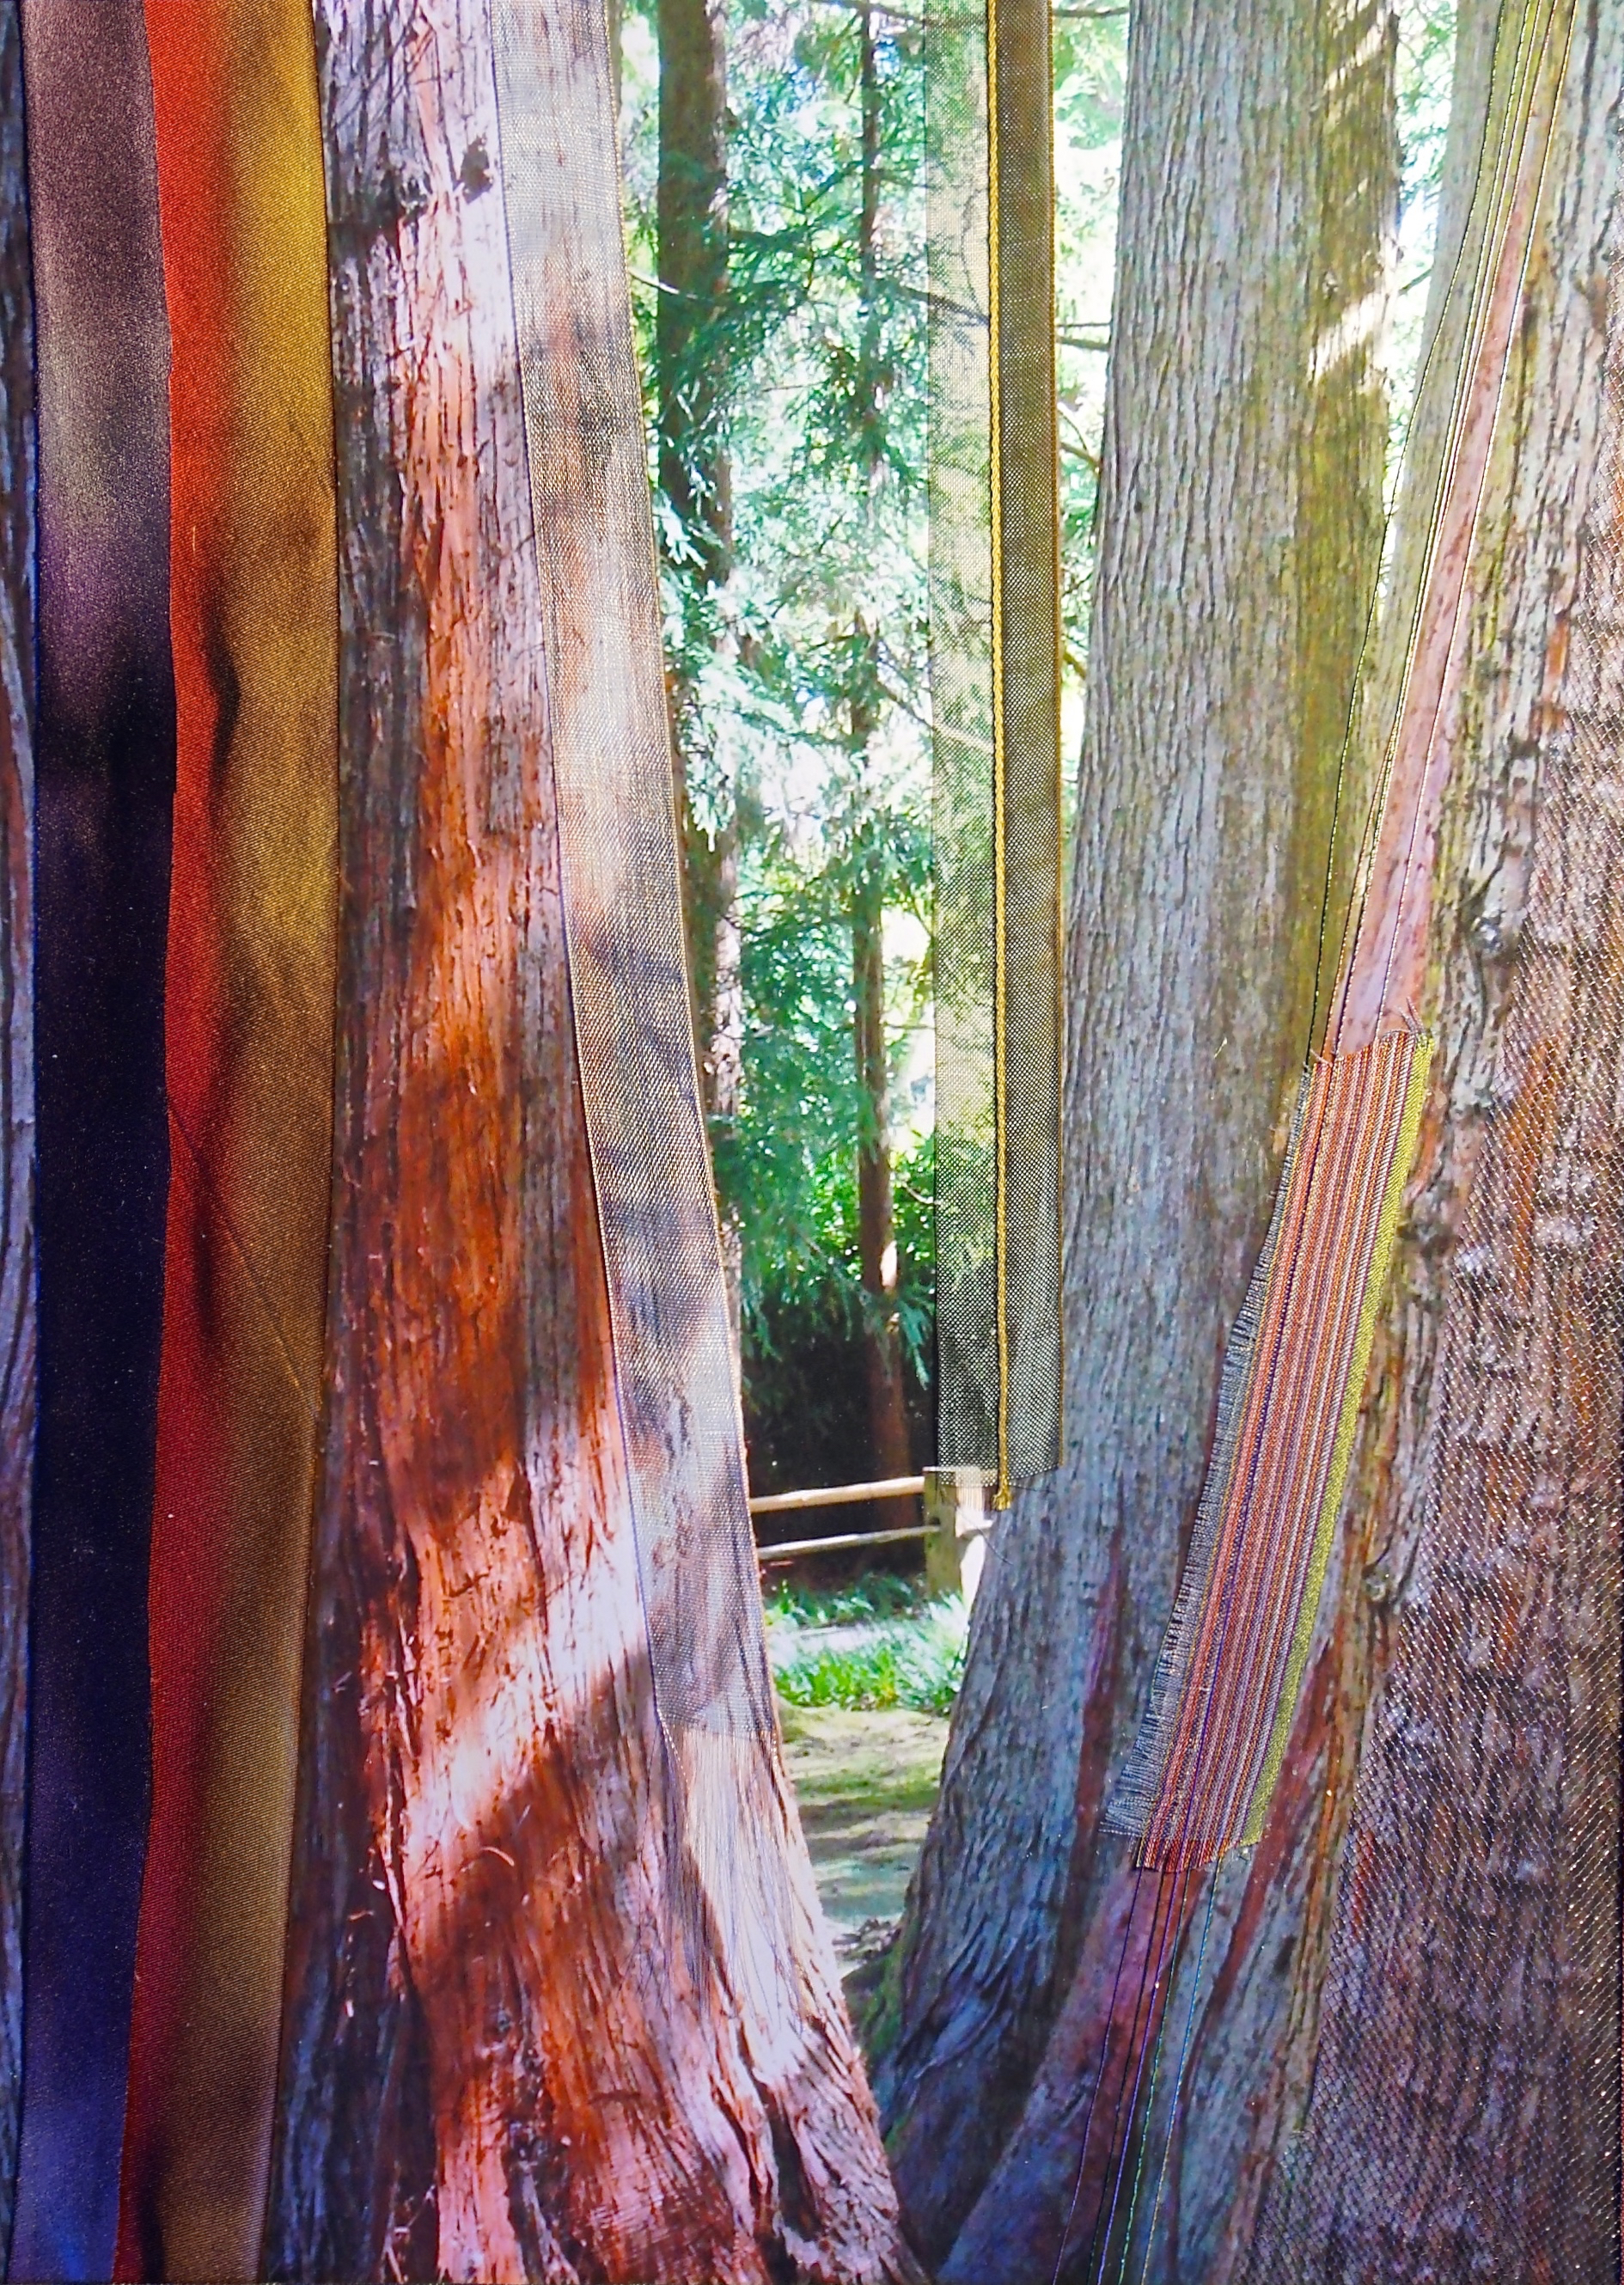   Nature Interlaced Series   Hide and Seek  15" x 18"&nbsp;  Paper and Silks  2015 